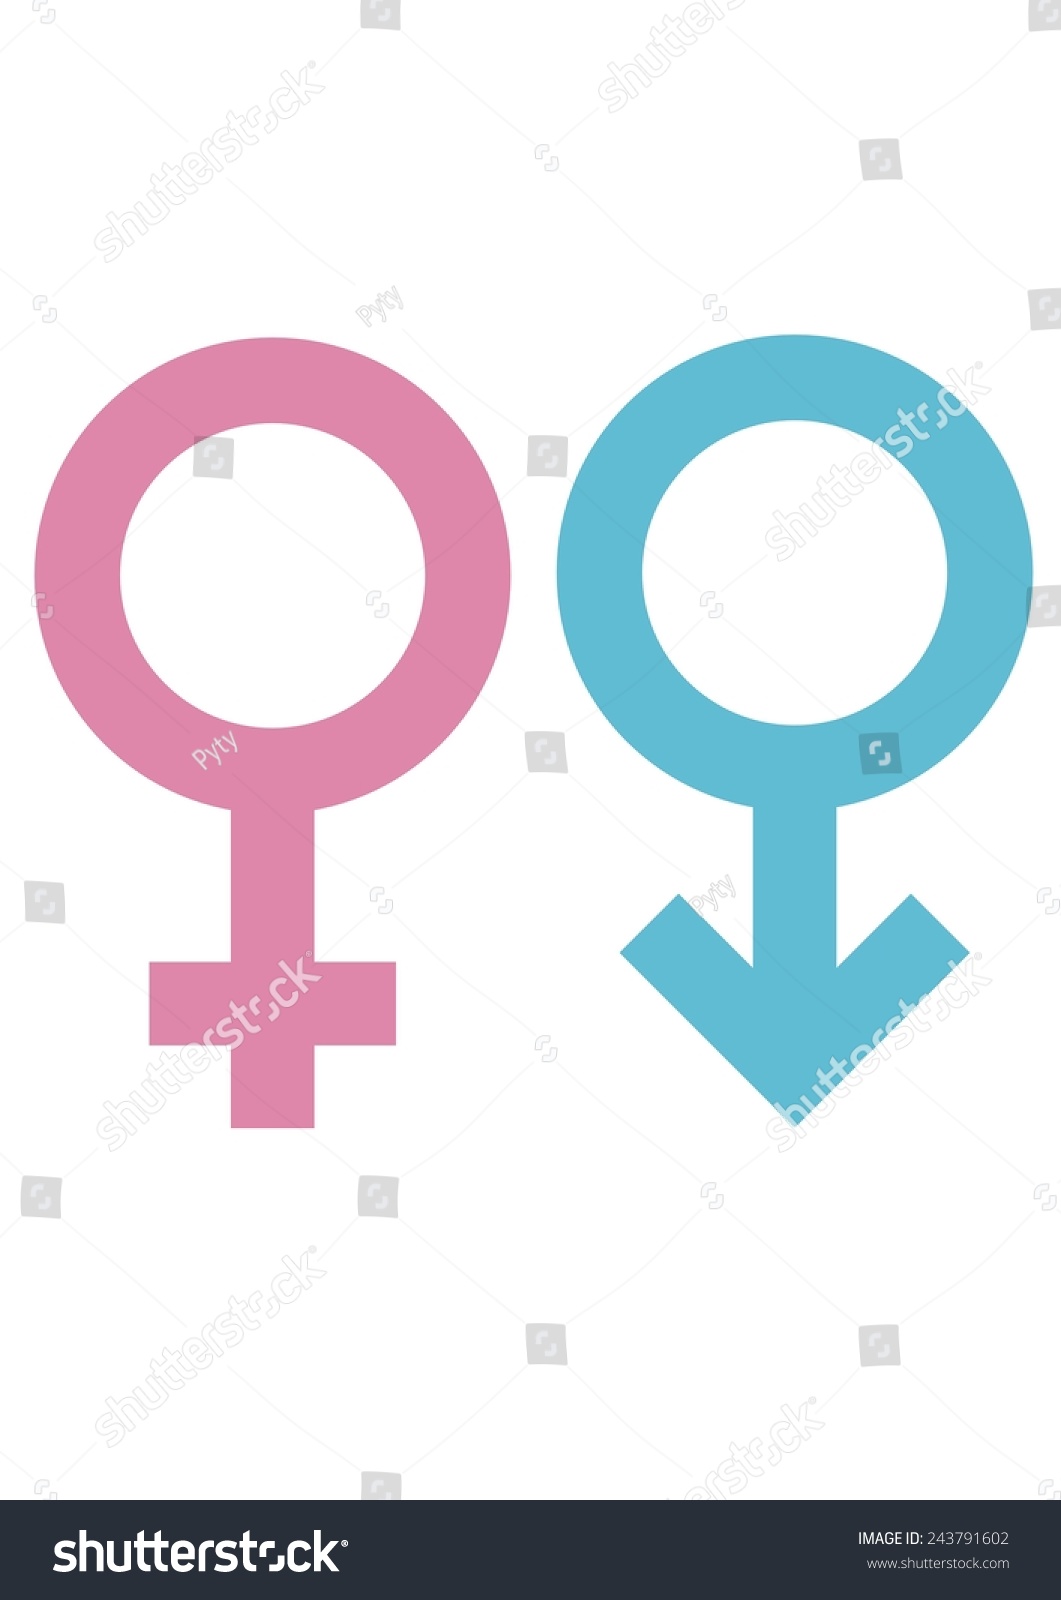 Gender Signs For Male And Female Circles With Cross And Arrow Stock Vector Illustration